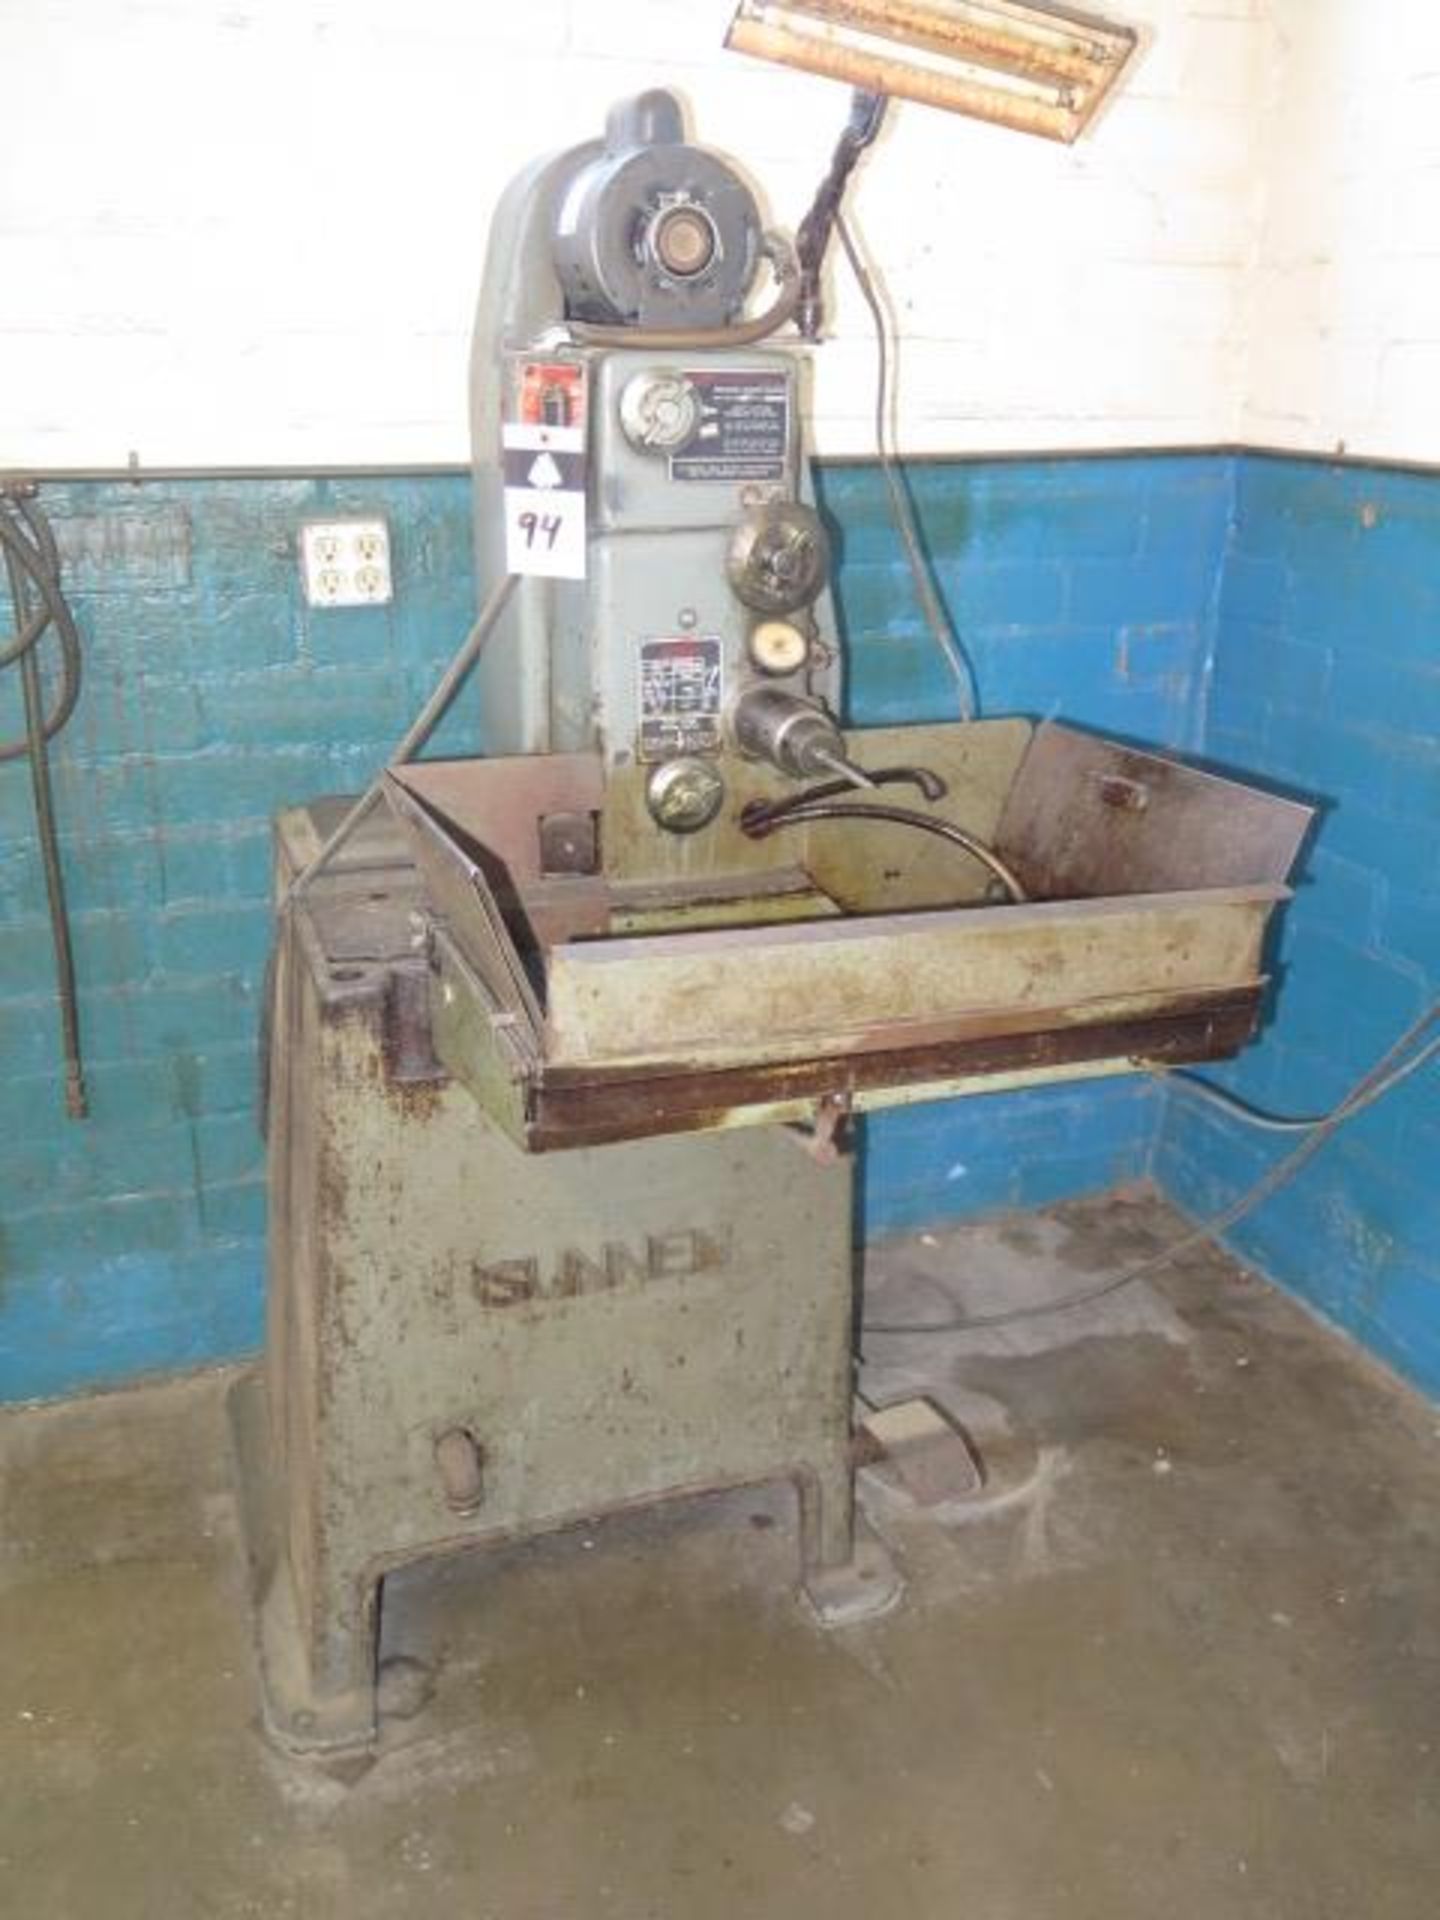 Sunnen MBB-1600 Precision Honing Machine s/n 43802 w/ Coolant (SOLD AS-IS - NO WARRANTY)